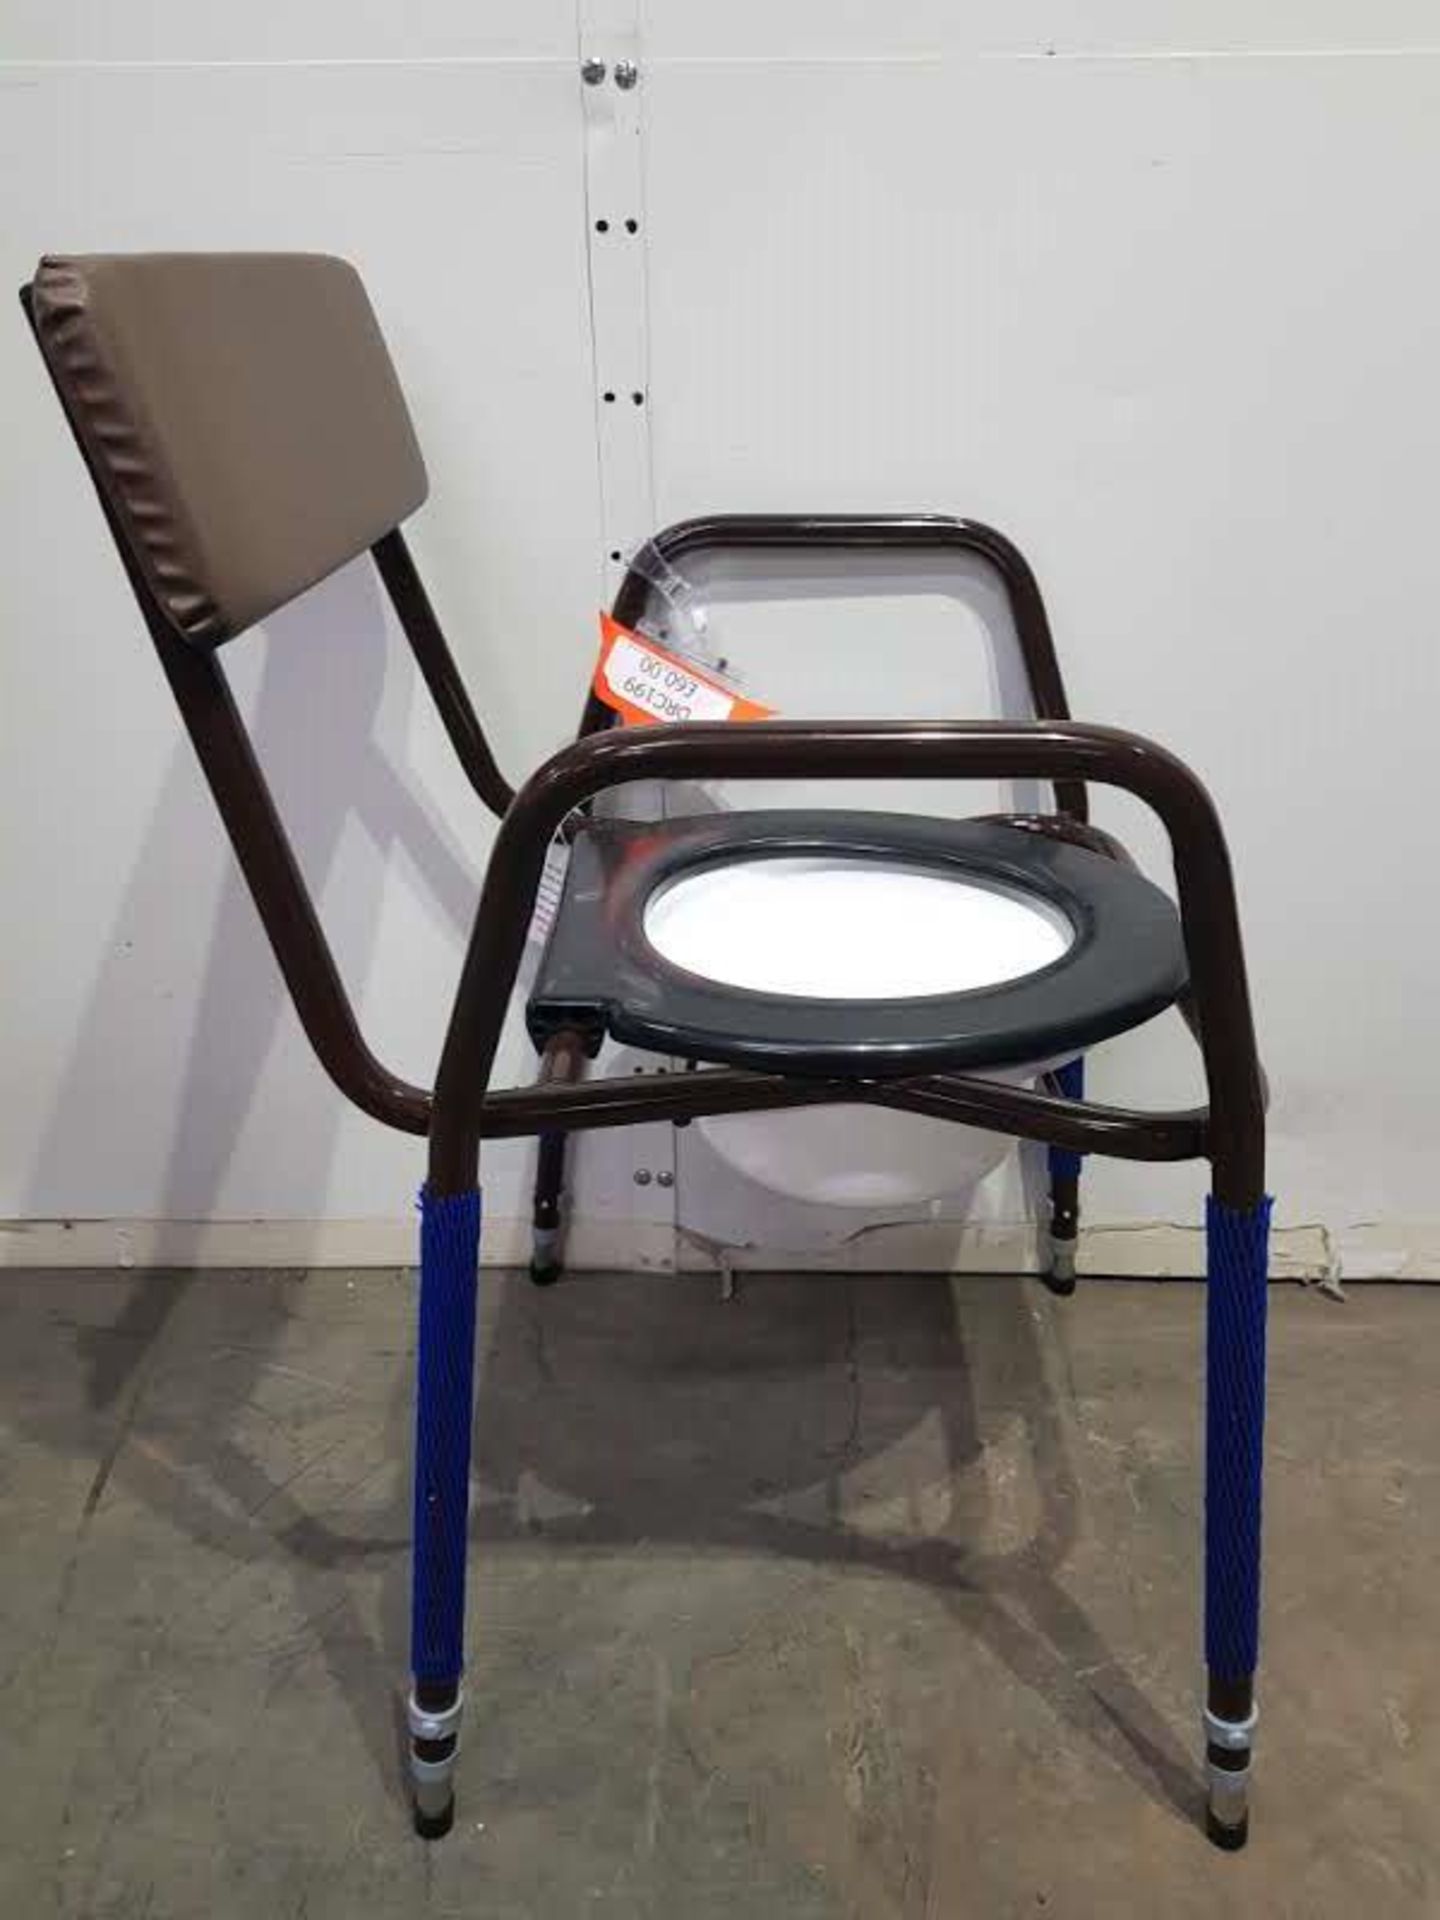 Cefindy Toilet Chair Height Adjustable - Image 3 of 4